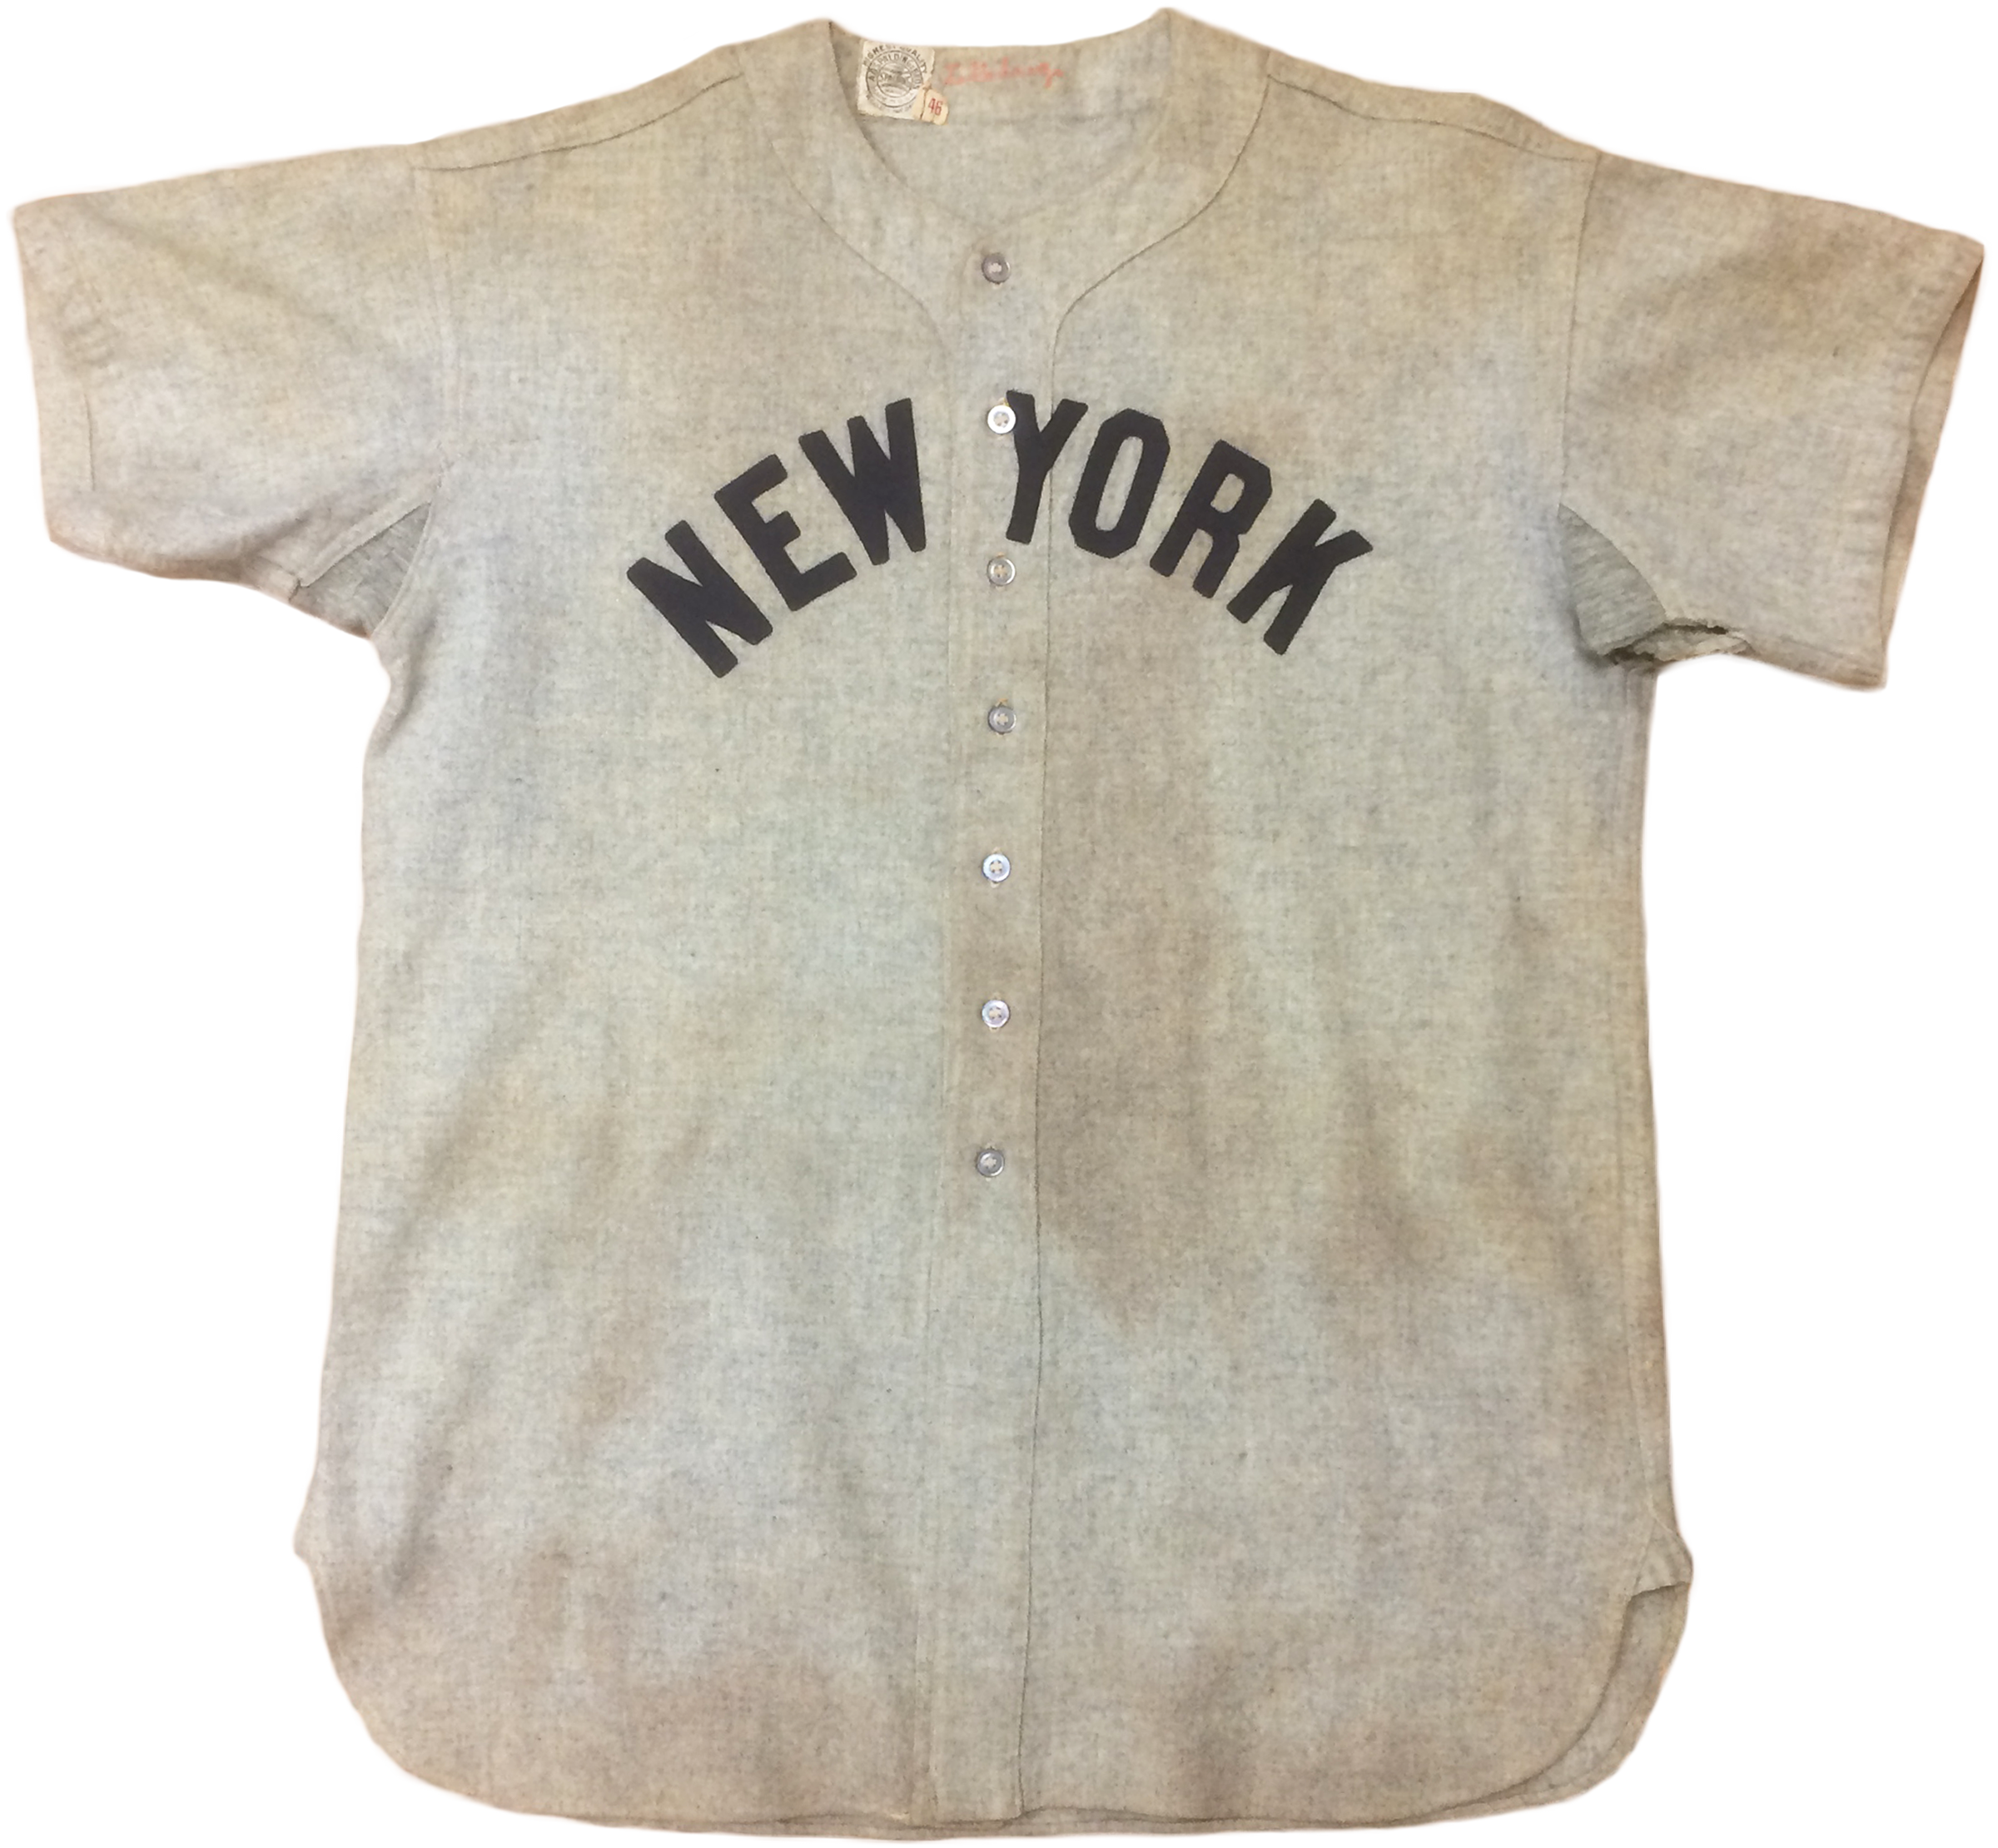 Lou Gehrig Jersey Sells for Record $2 